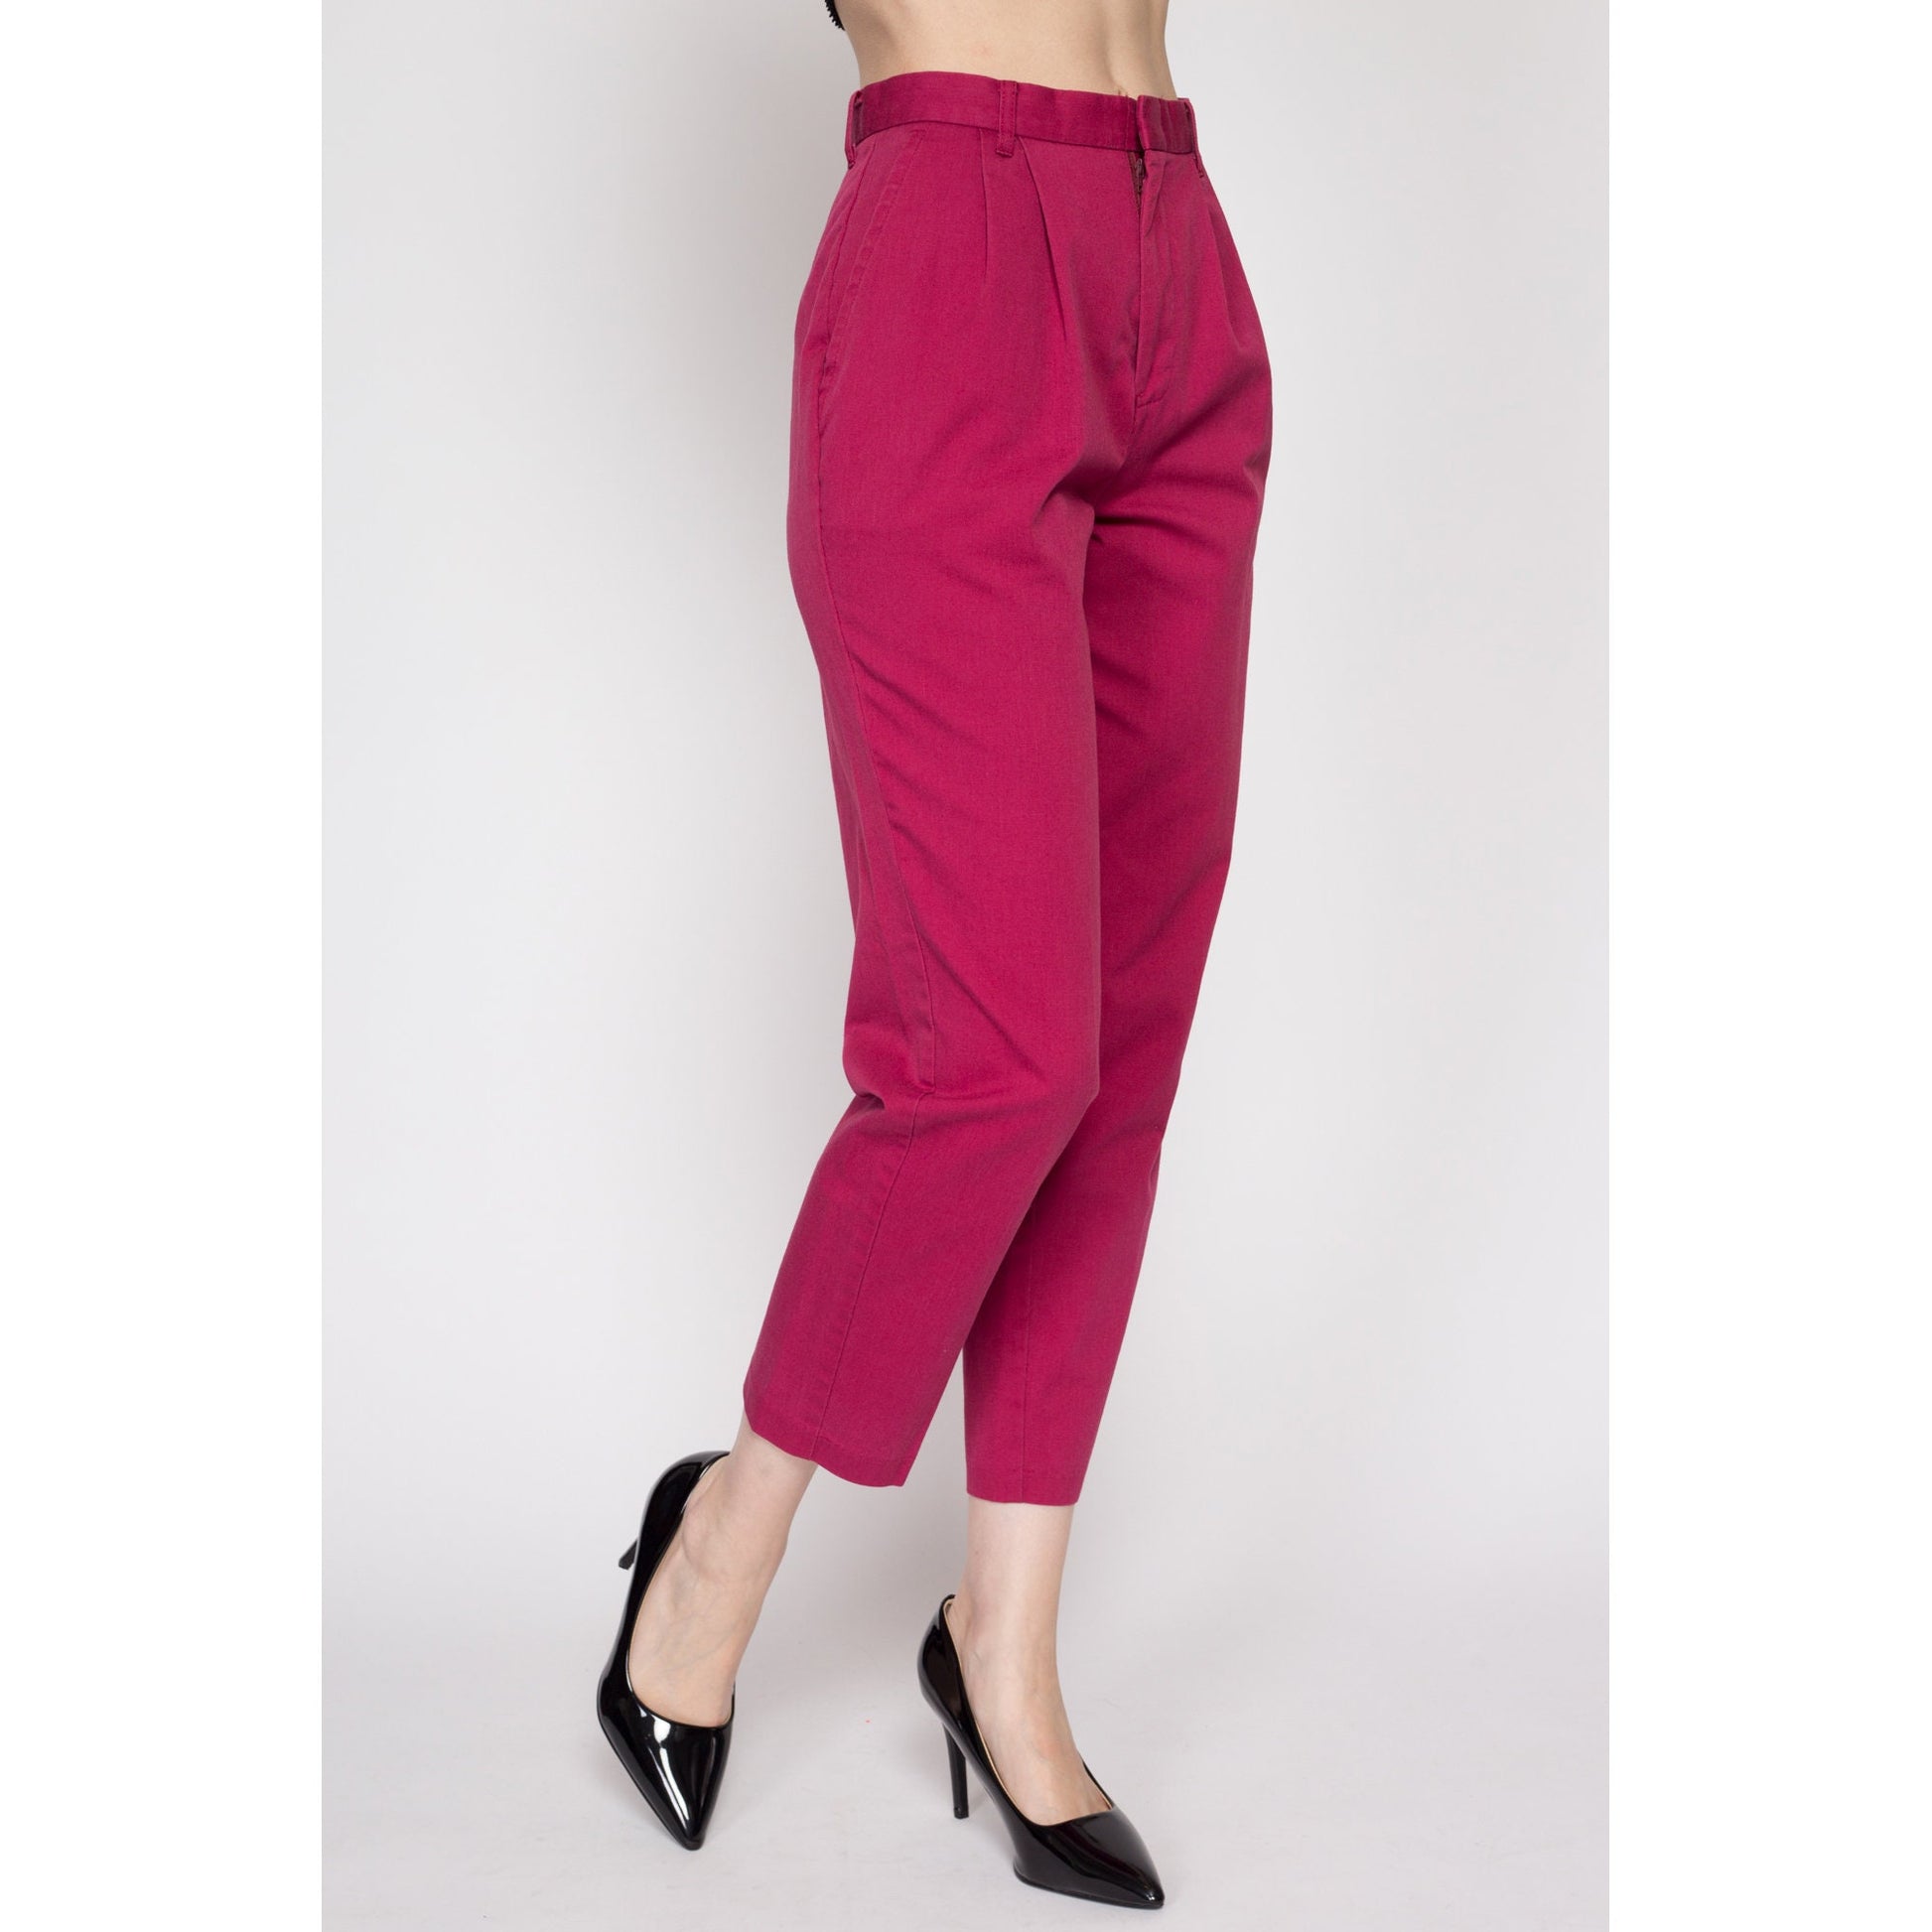 Petite Small 80s Chic Raspberry Pink Trousers 25”